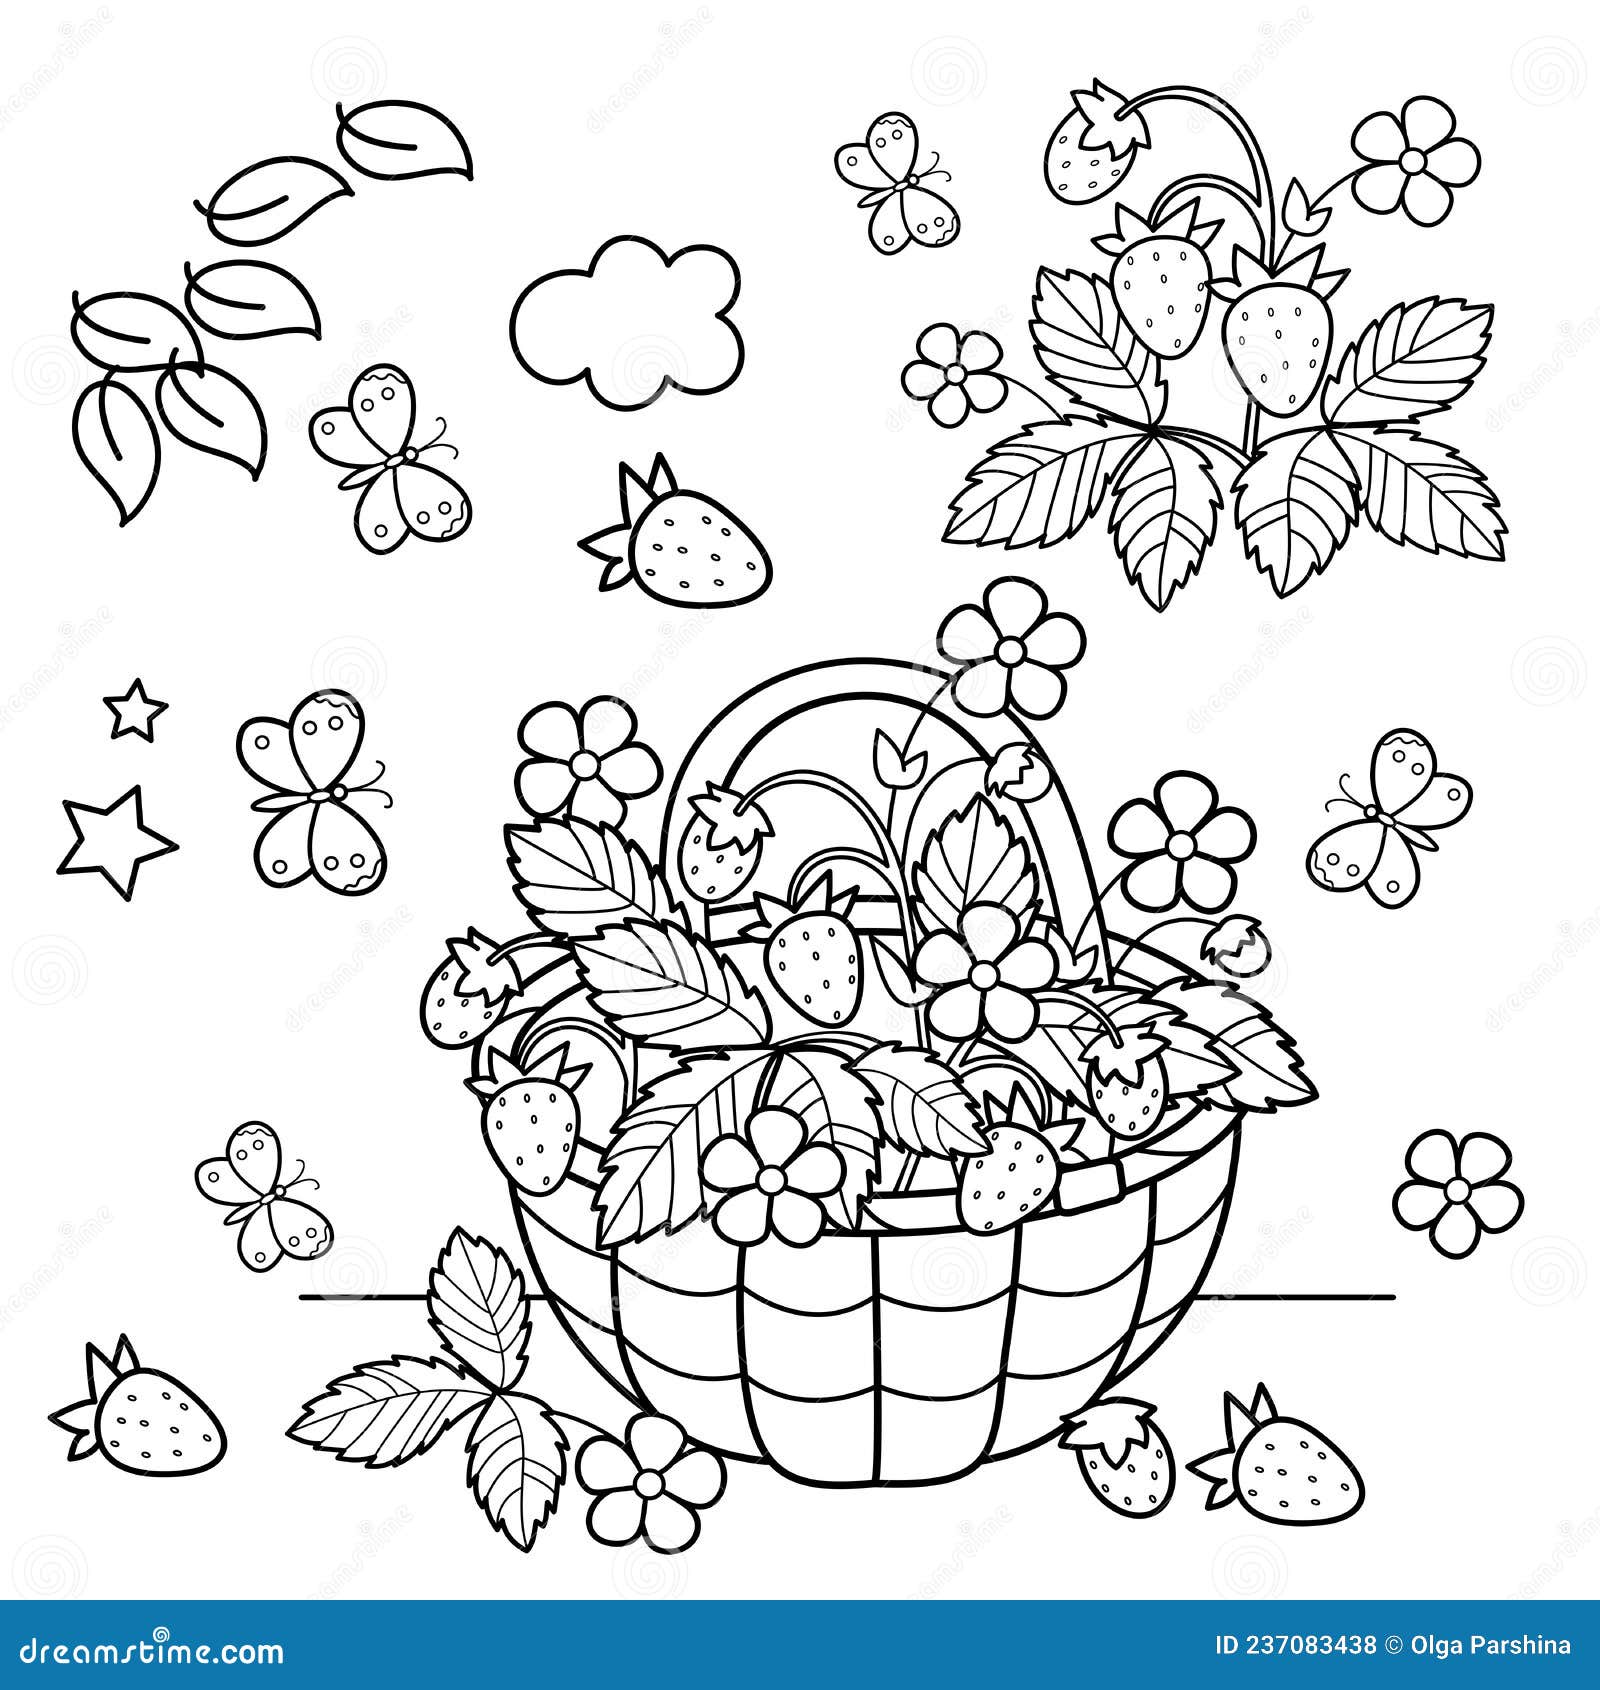 Coloring page outline of cartoon basket of berries garden strawberry summer gifts of nature stock vector